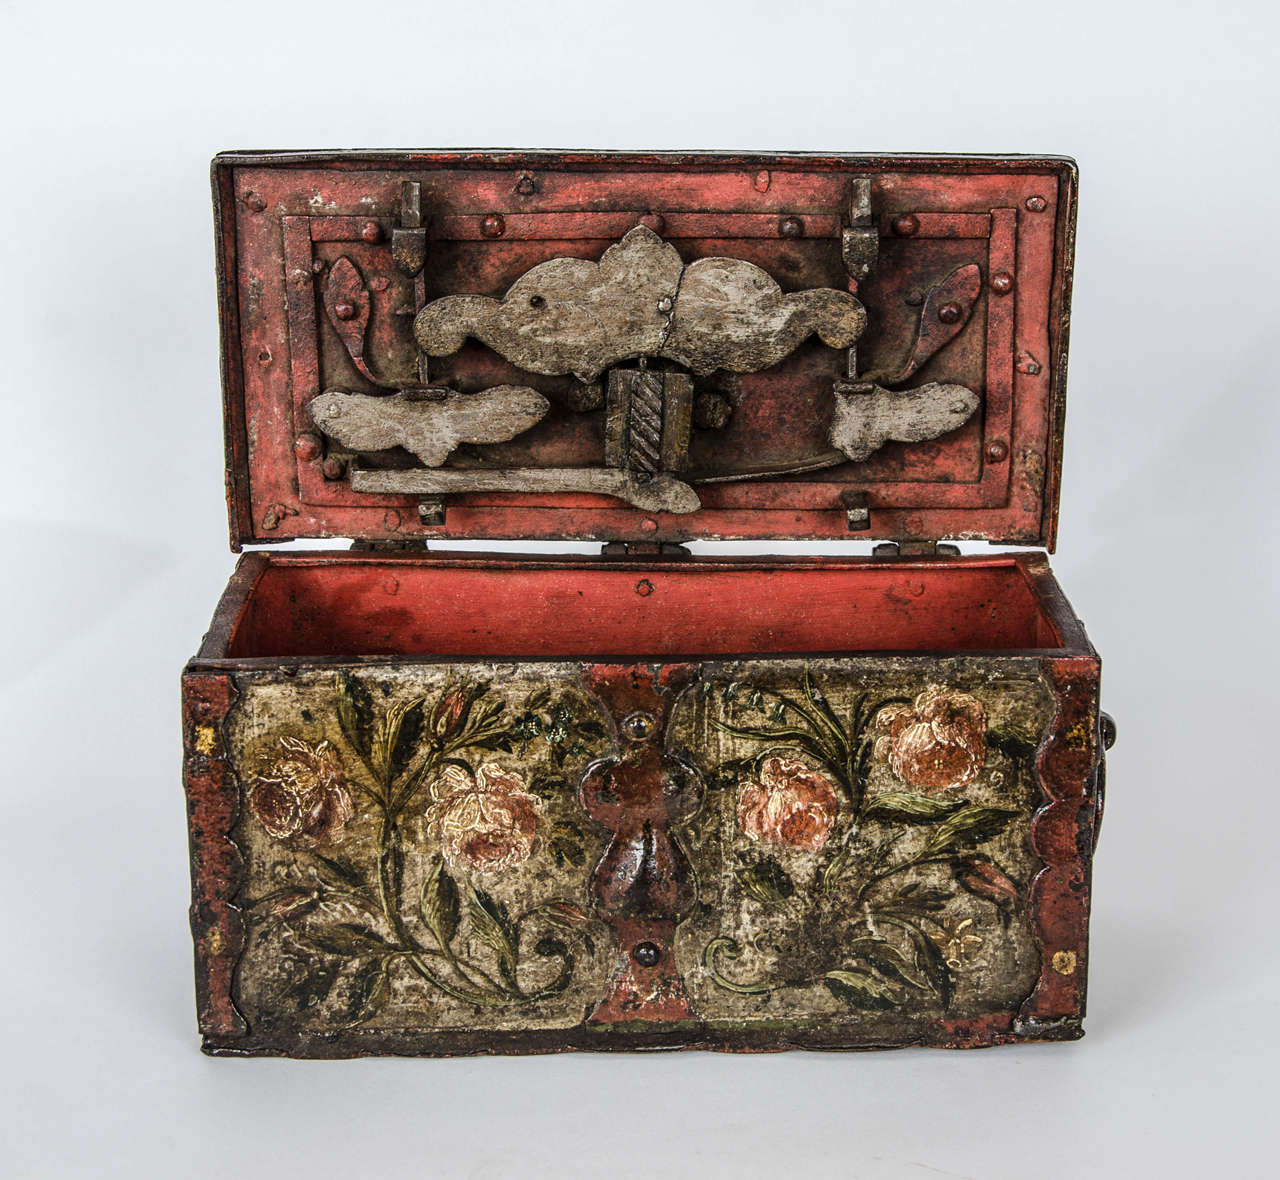 Baroque North European Small Painted Dowry Casket